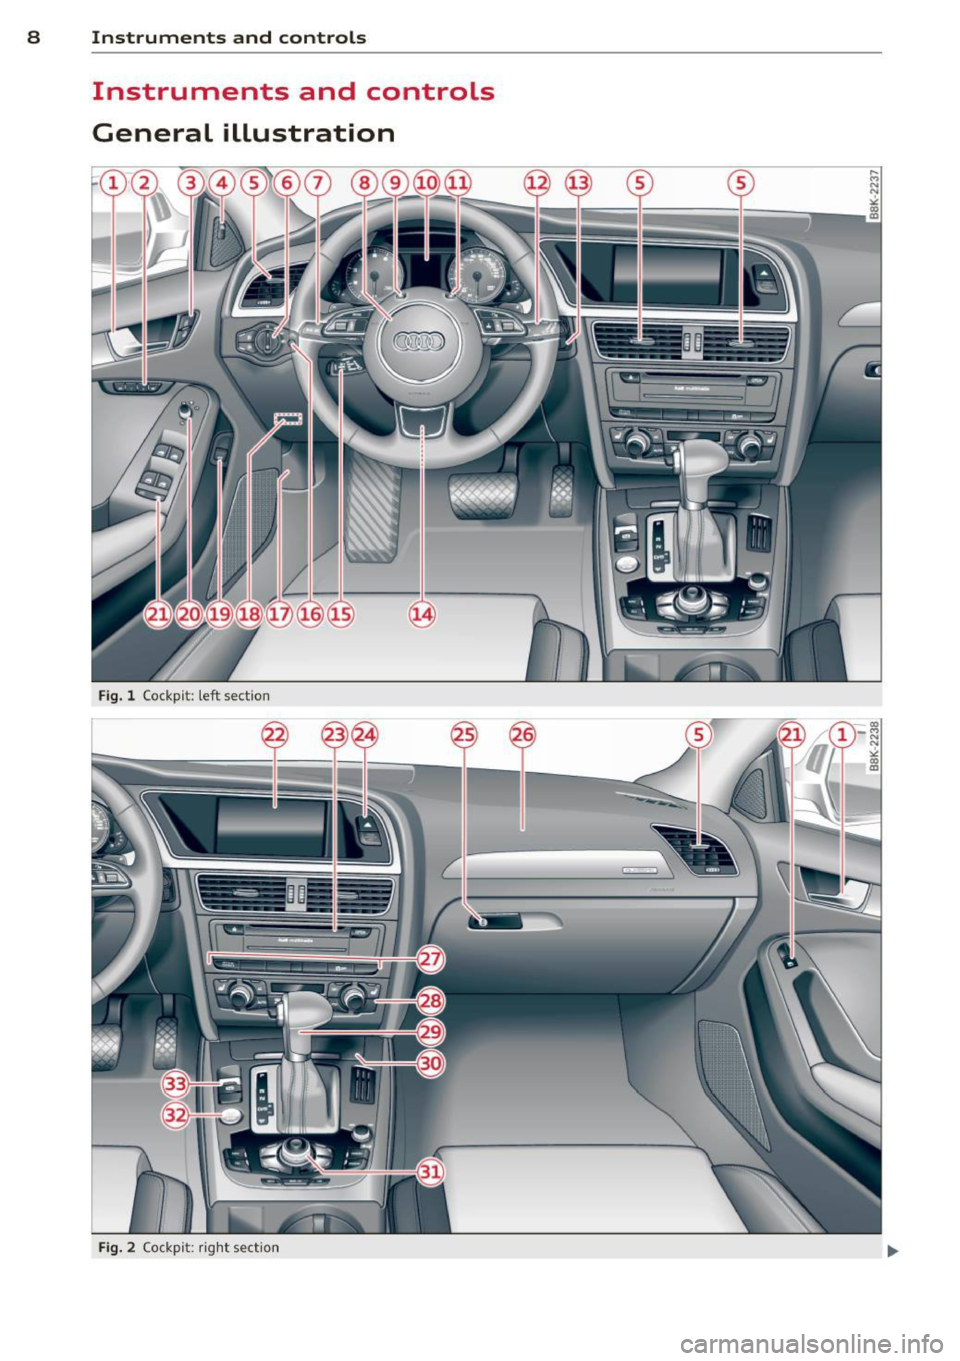 AUDI S4 2014  Owners Manual 8  Instruments and controls 
Instruments  and  controls 
General  illustration 
Fig. l Cockp it:  left  sect io n 
---=- ---1 =----- -
- --
- --
Fig. 2 Cock pi t: ri ght  sect io n  